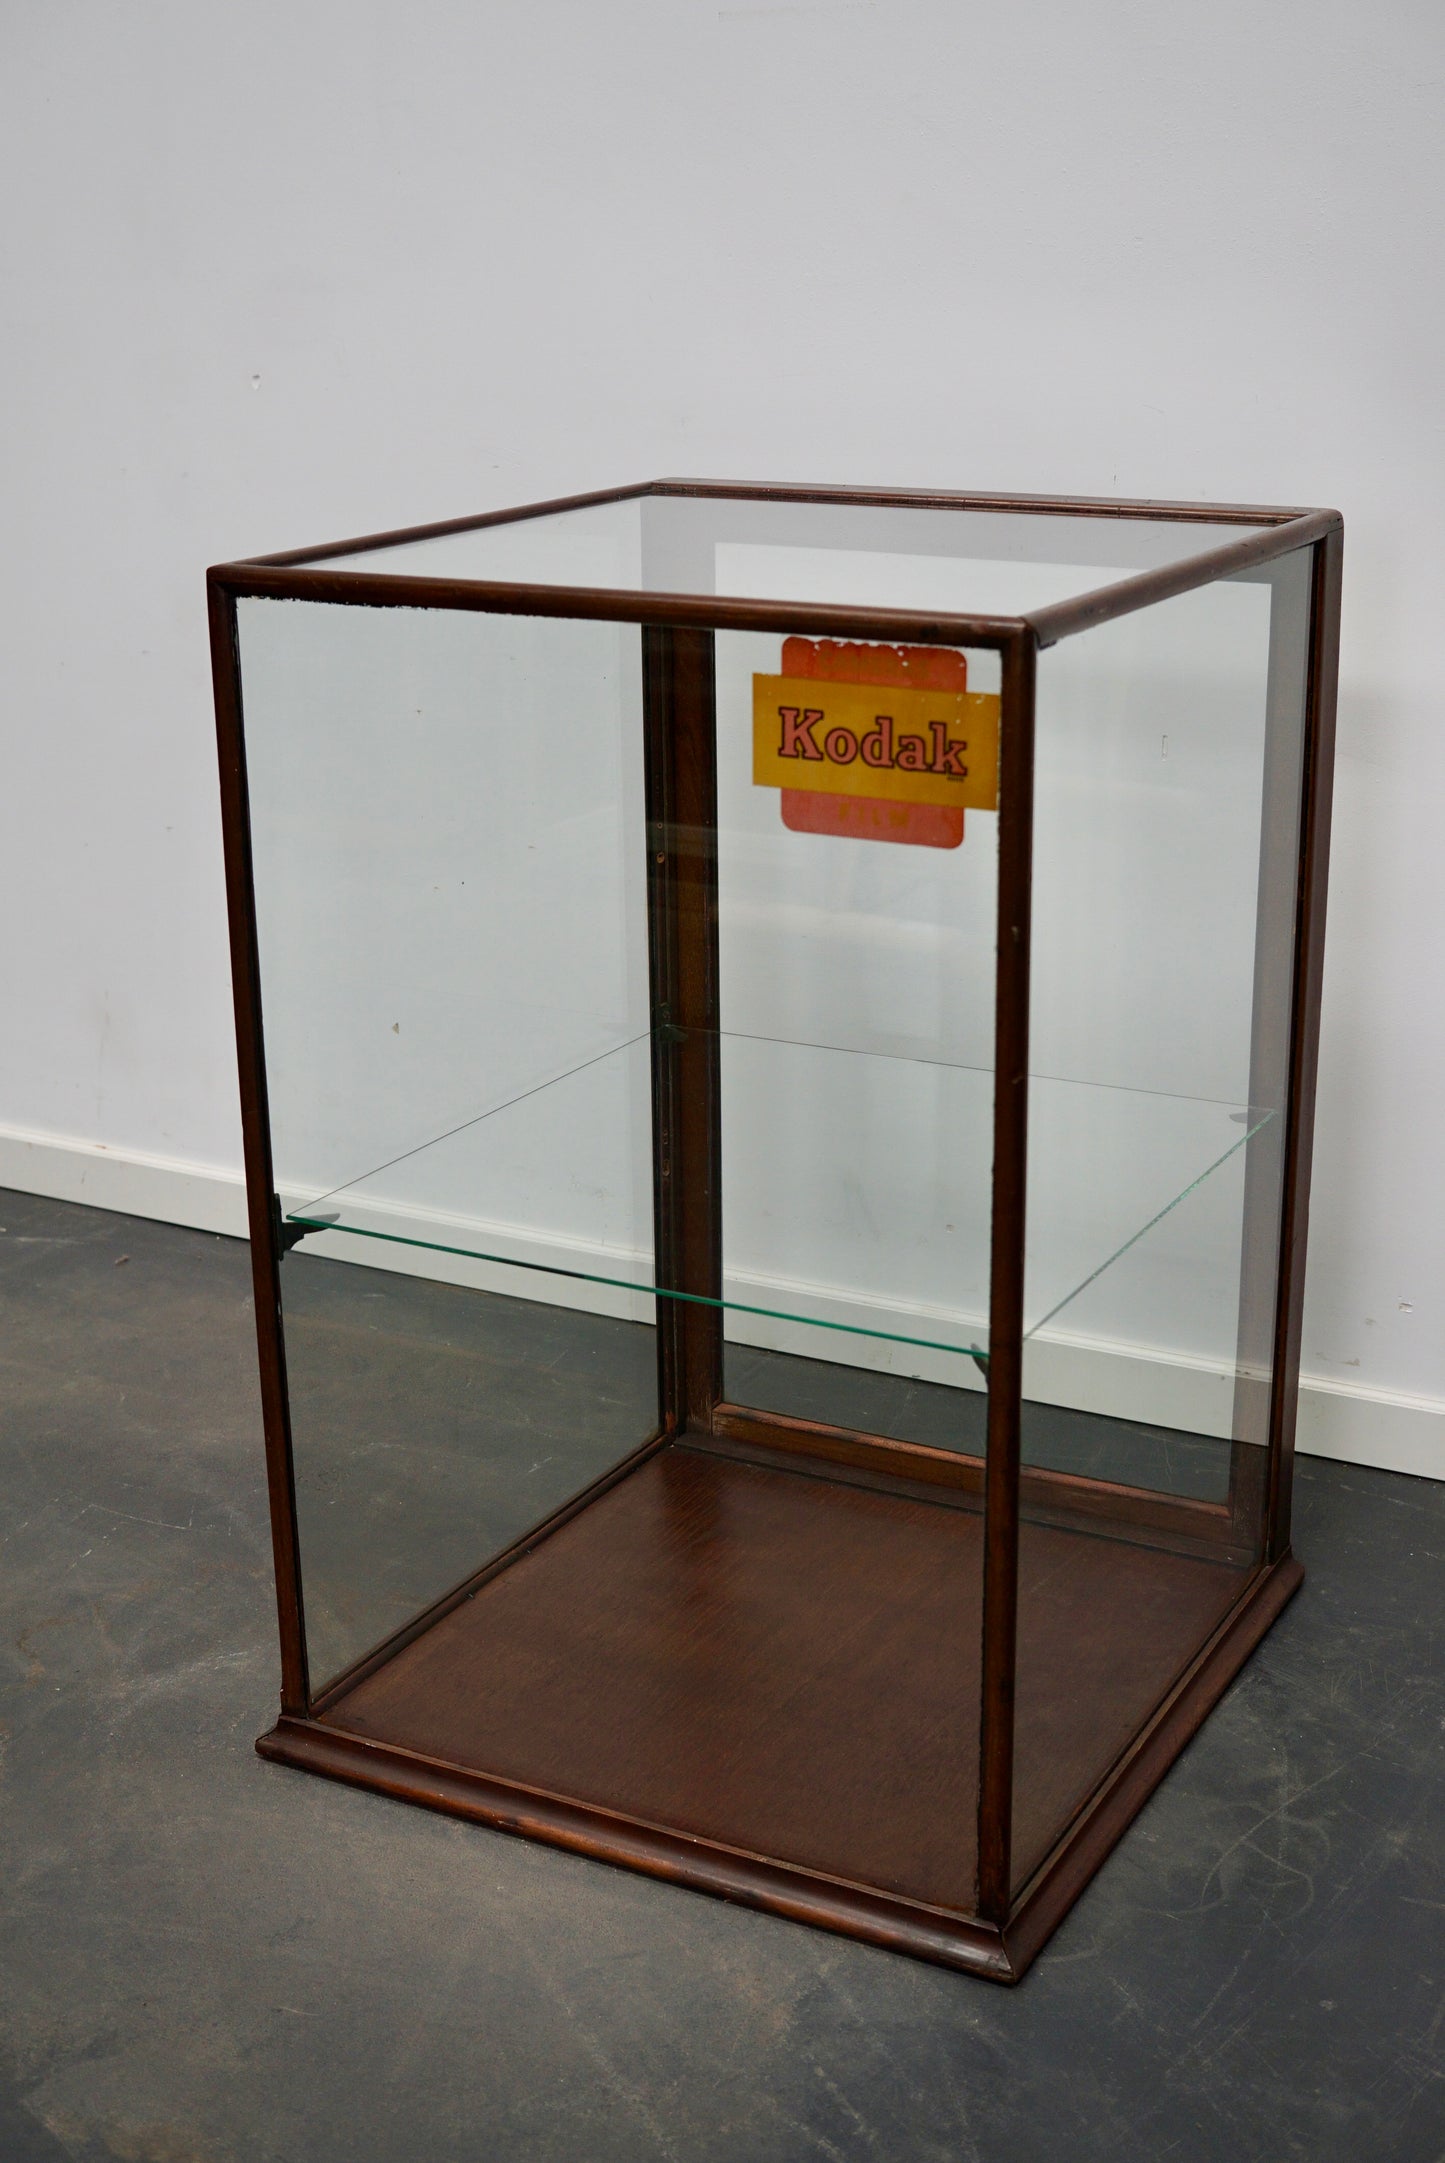 Victorian Mahogany Museum / Shop Display Cabinet or Vitrine, Late 19th Century